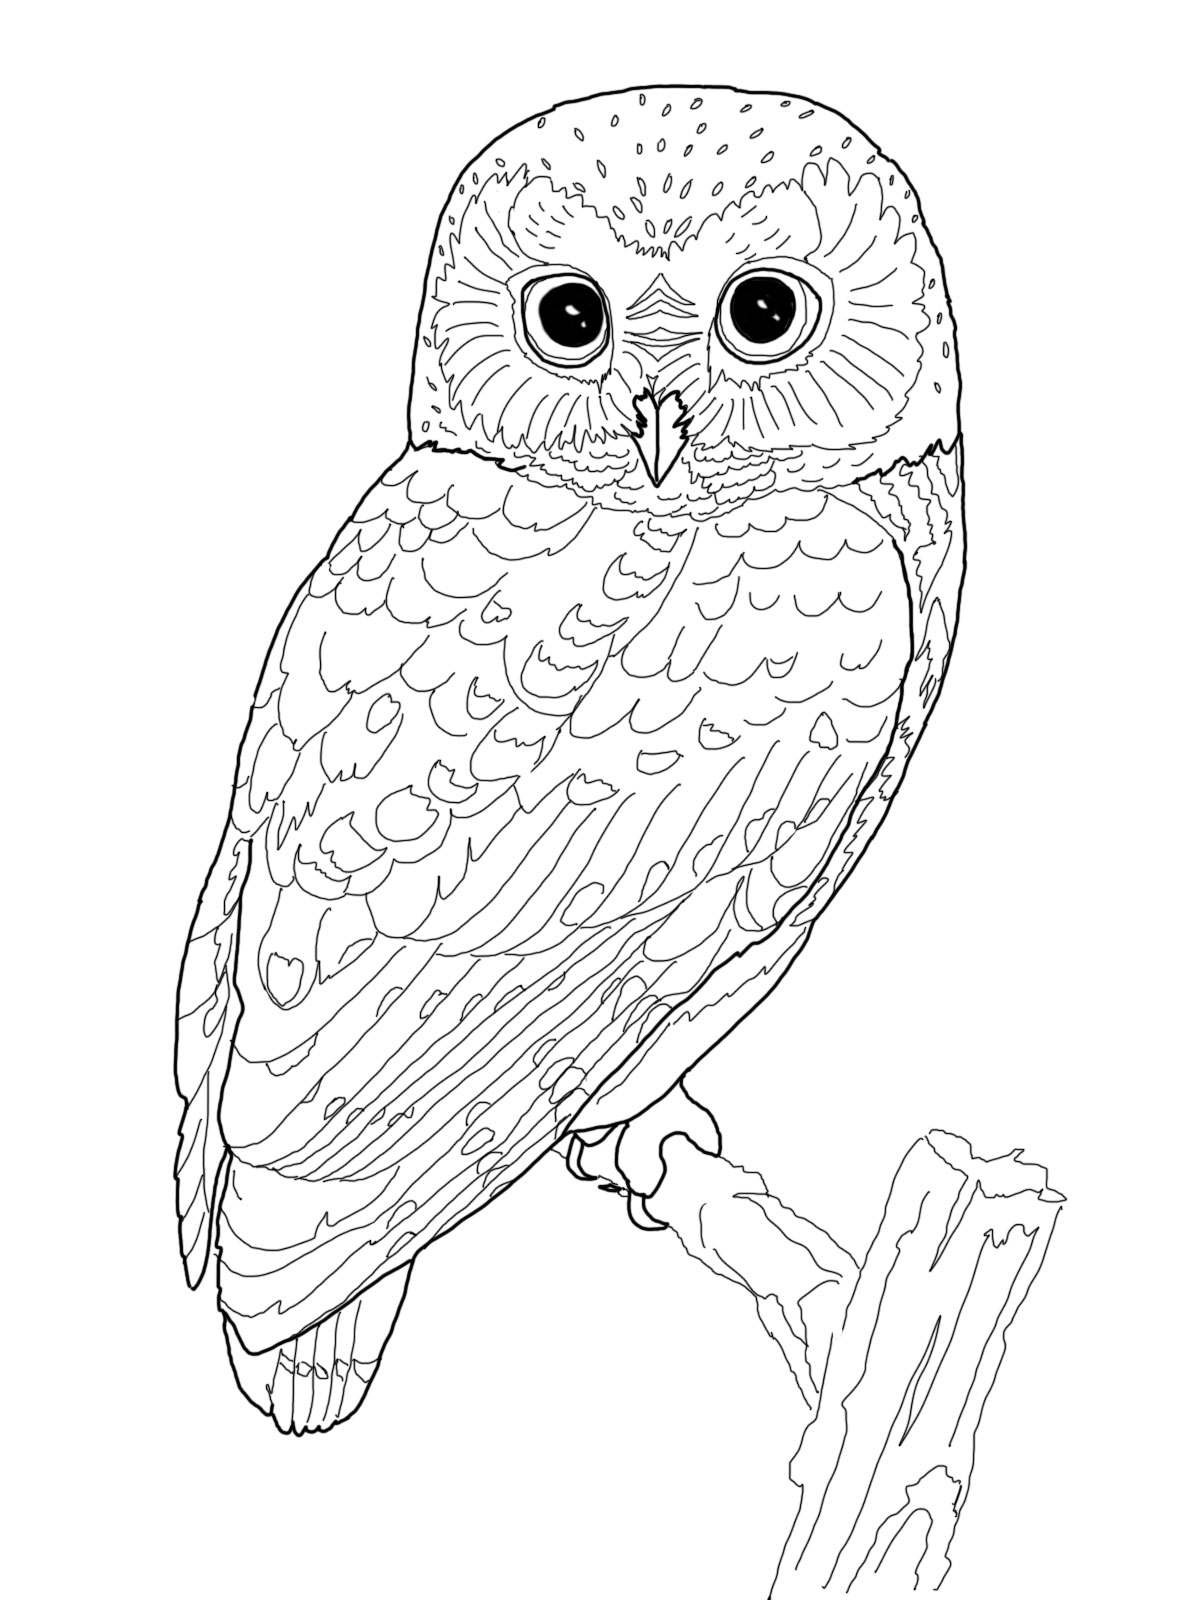 Owl Coloring Pages Printable
 Owl Coloring Pages